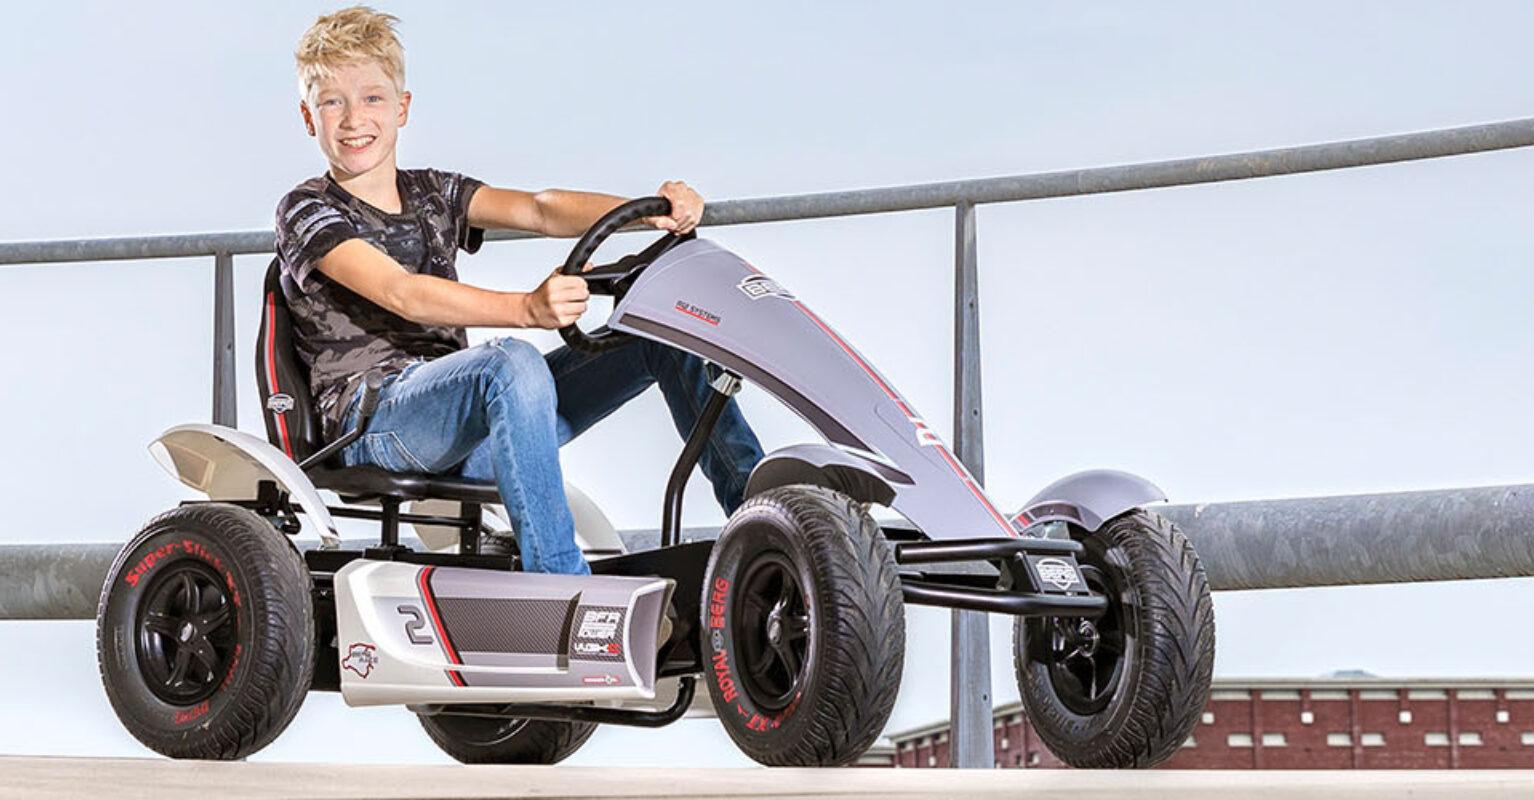 Information, everything about pedal karts